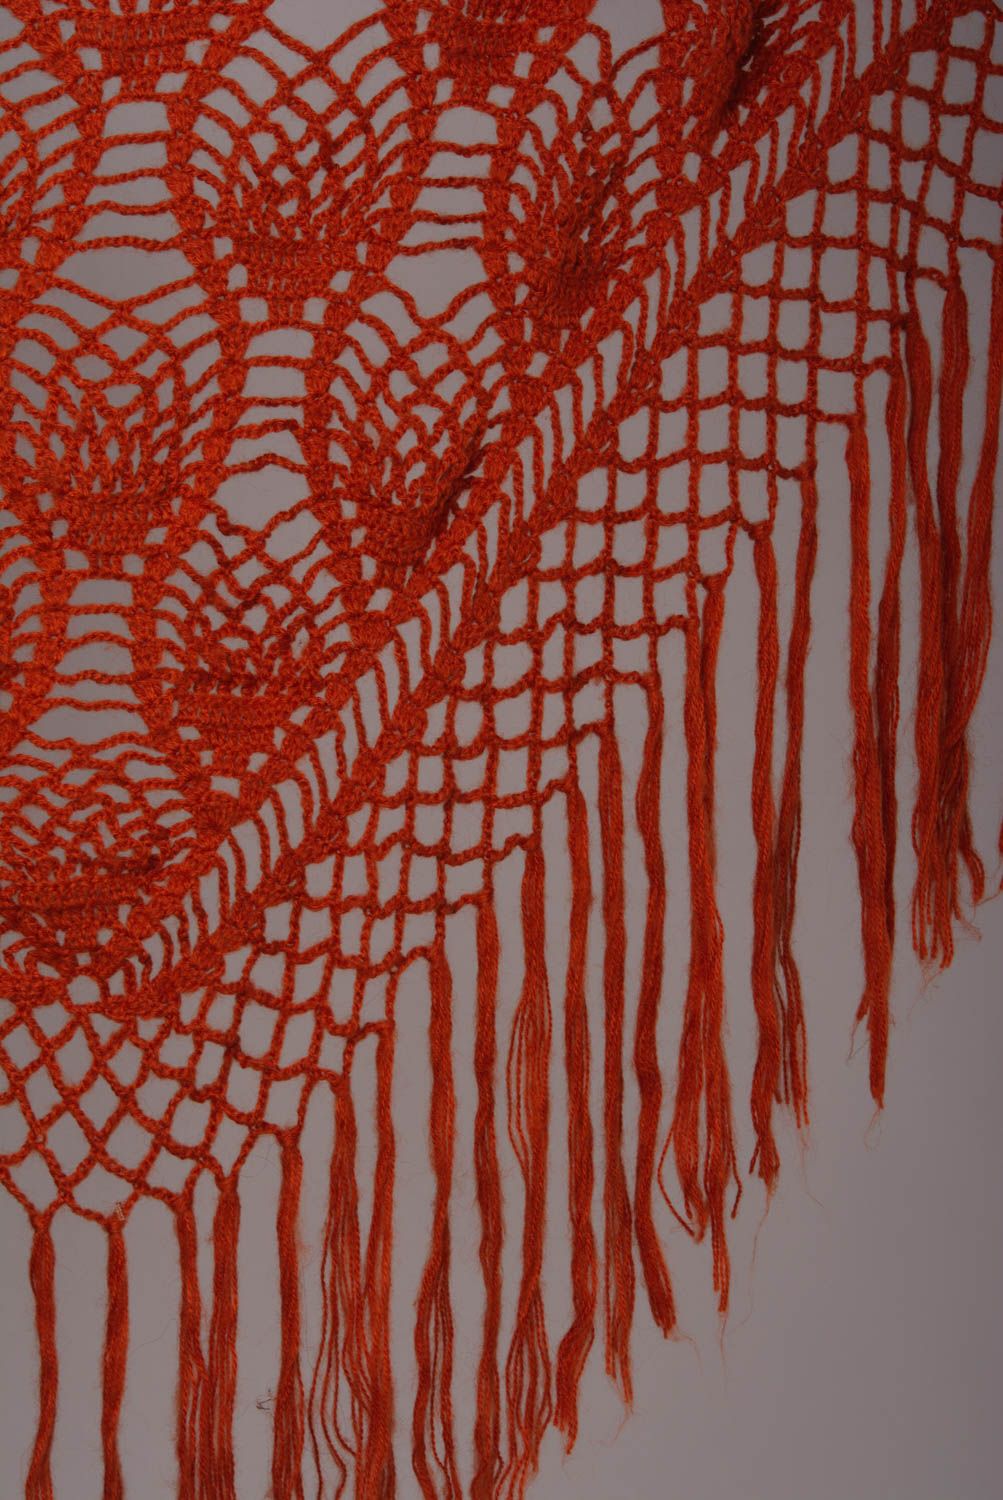 Handmade warm lace women's shawl knitted of wool of bright orange color photo 3